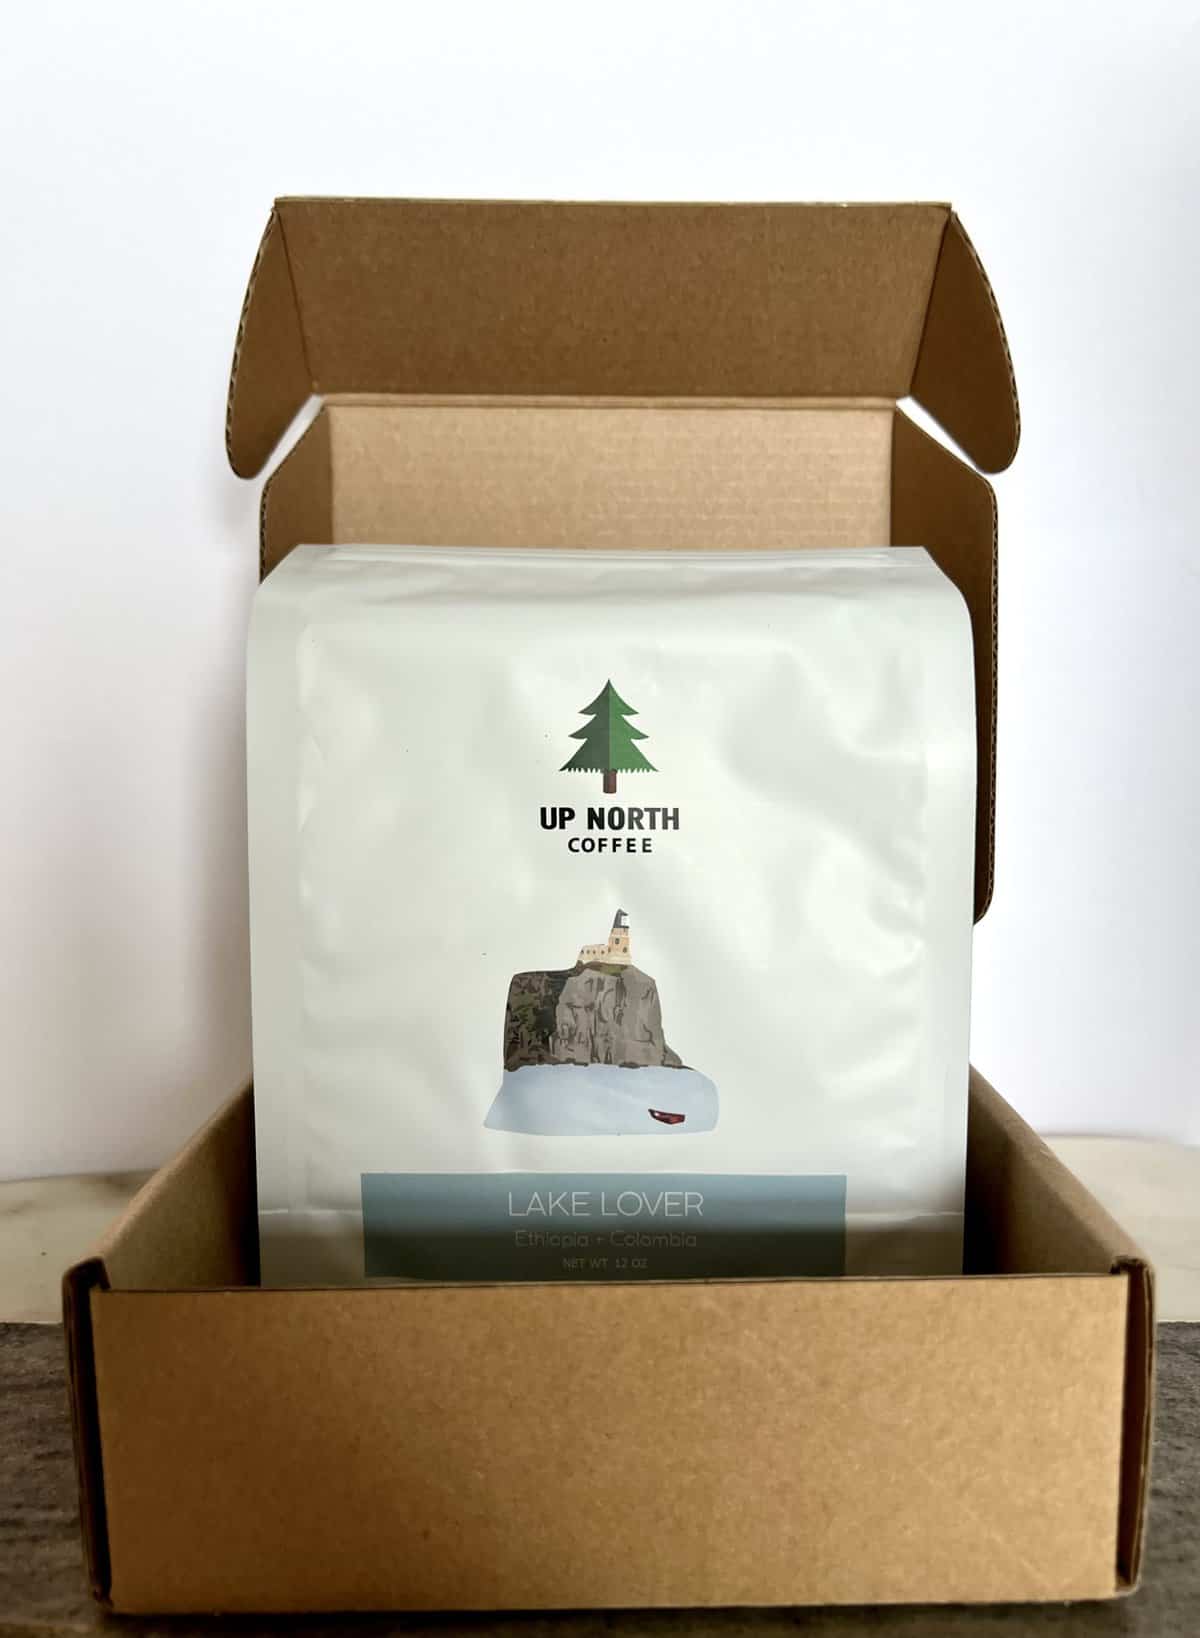 Packaging-of-Up-North-Coffee-in-a-shipping-box-scaled